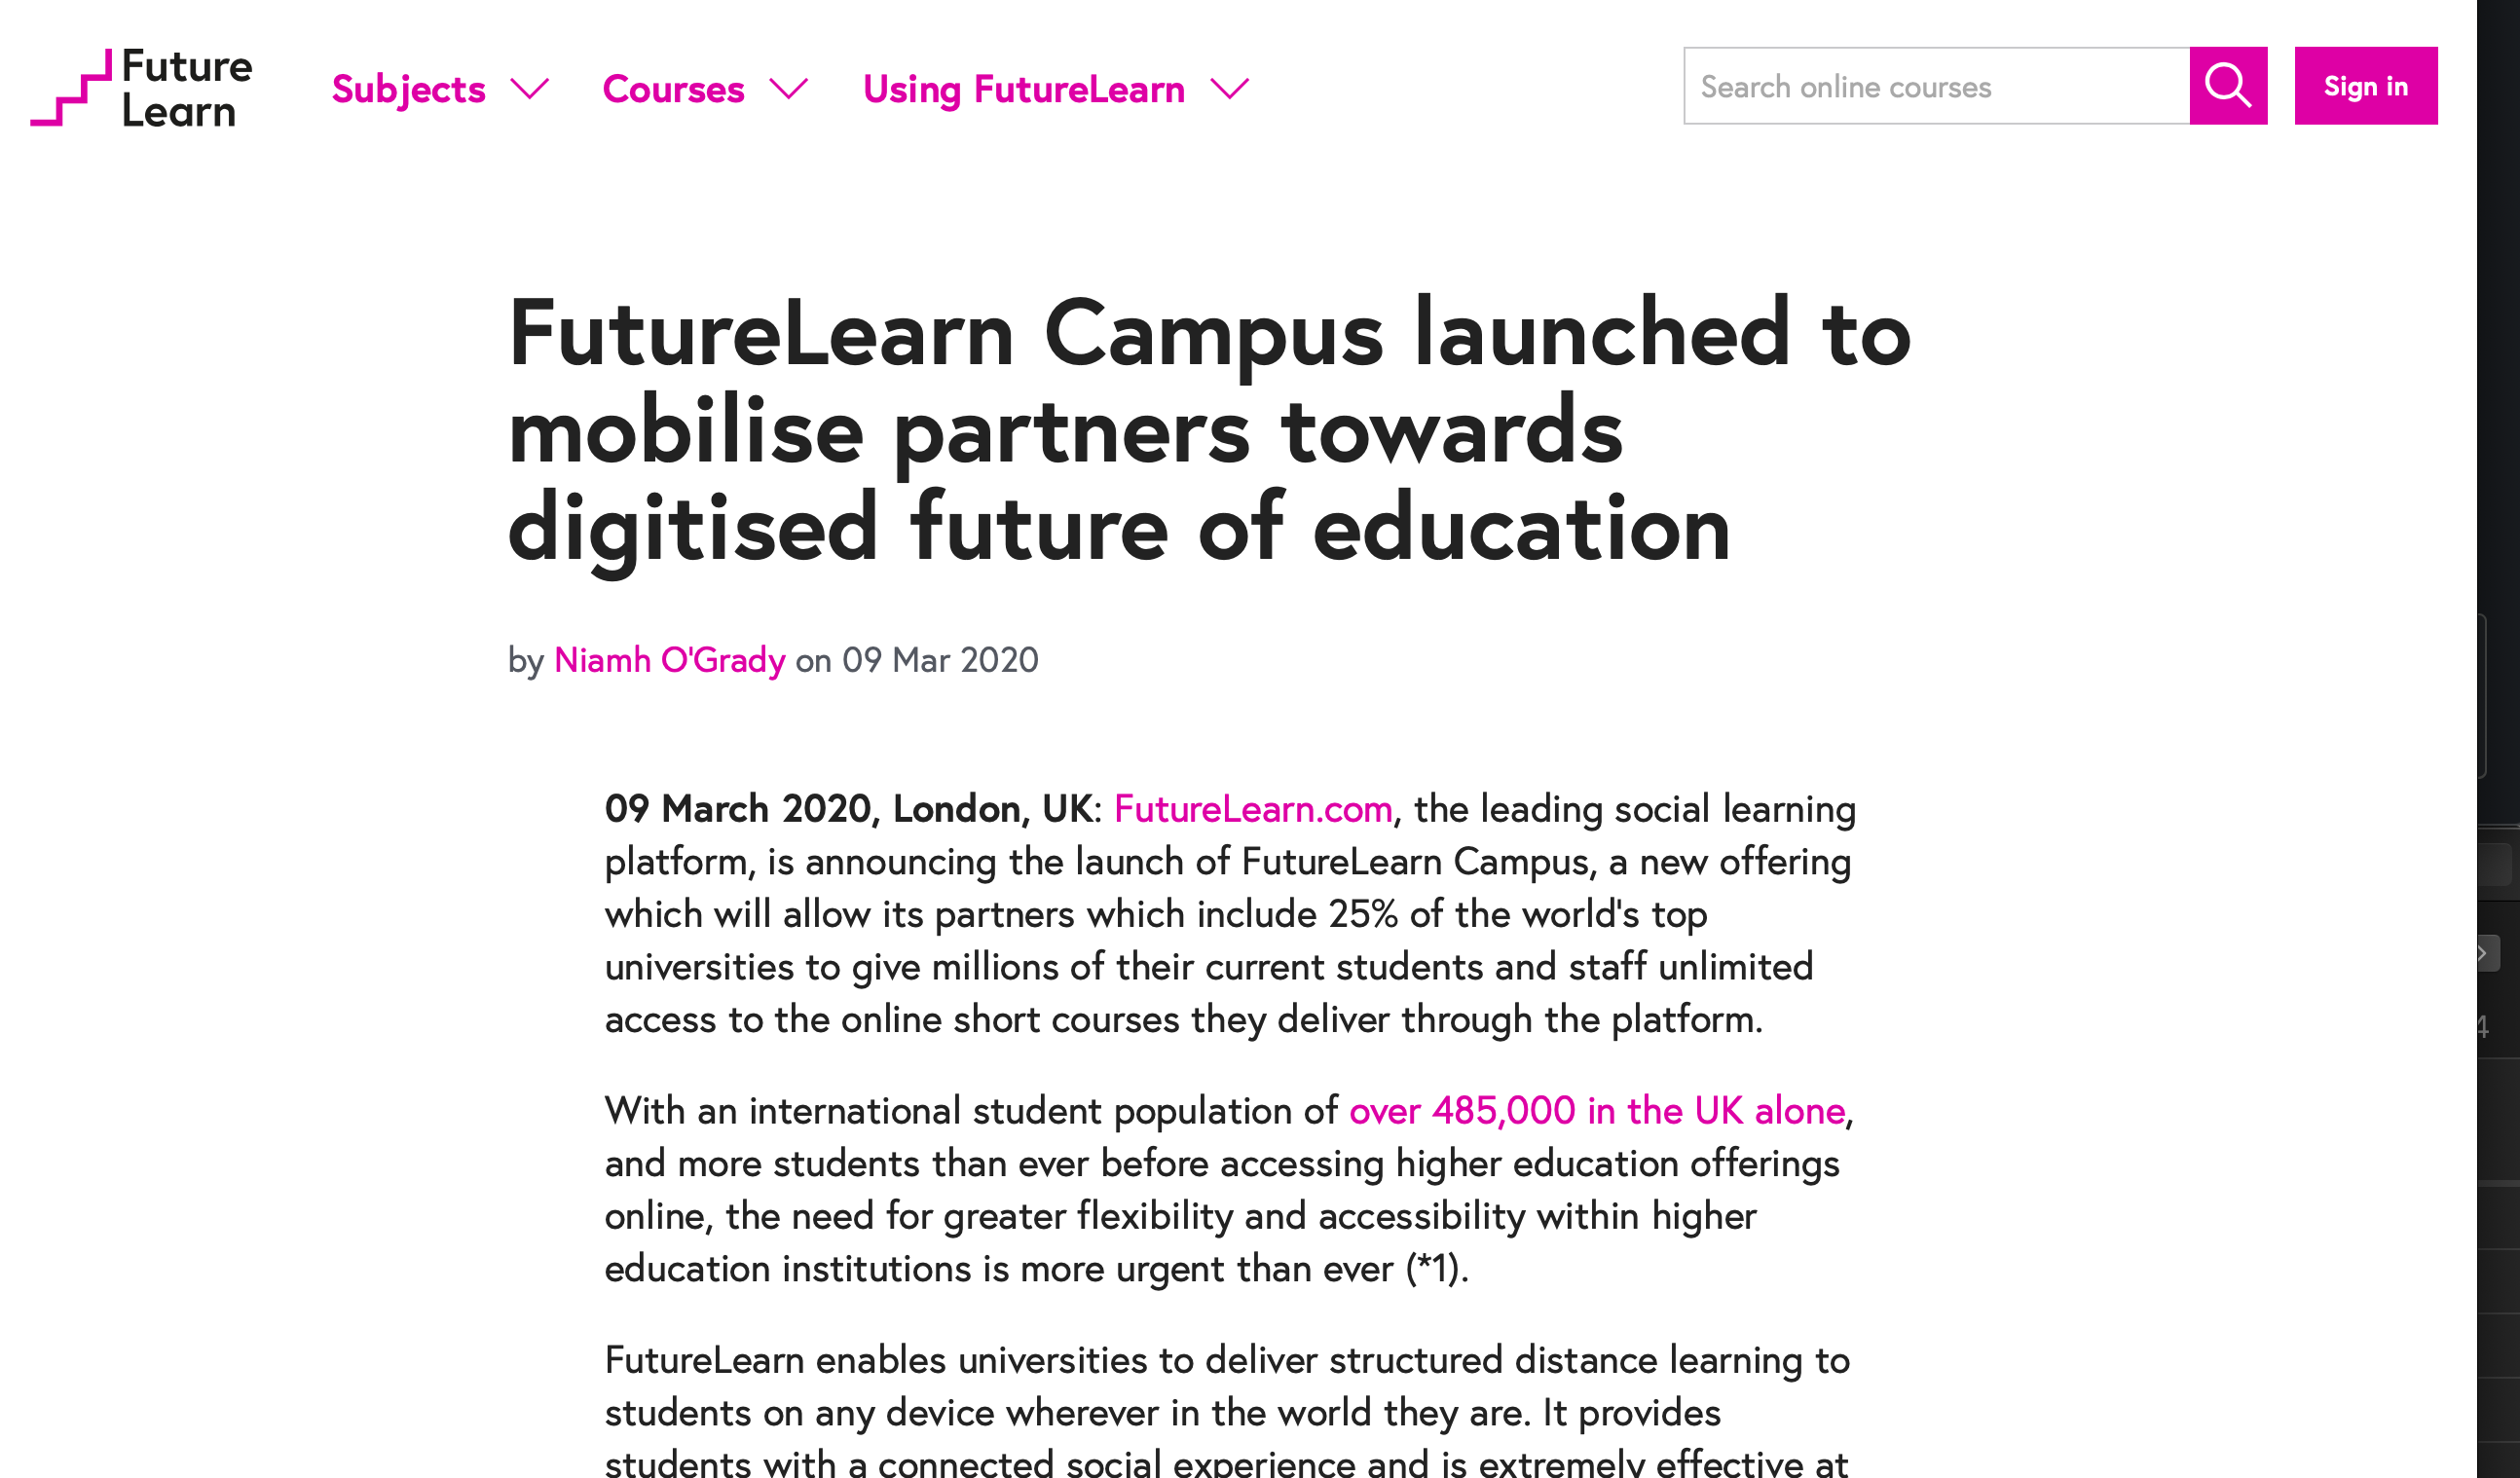 FutureLearn Campus launched to mobilise partners towards digitised future of education